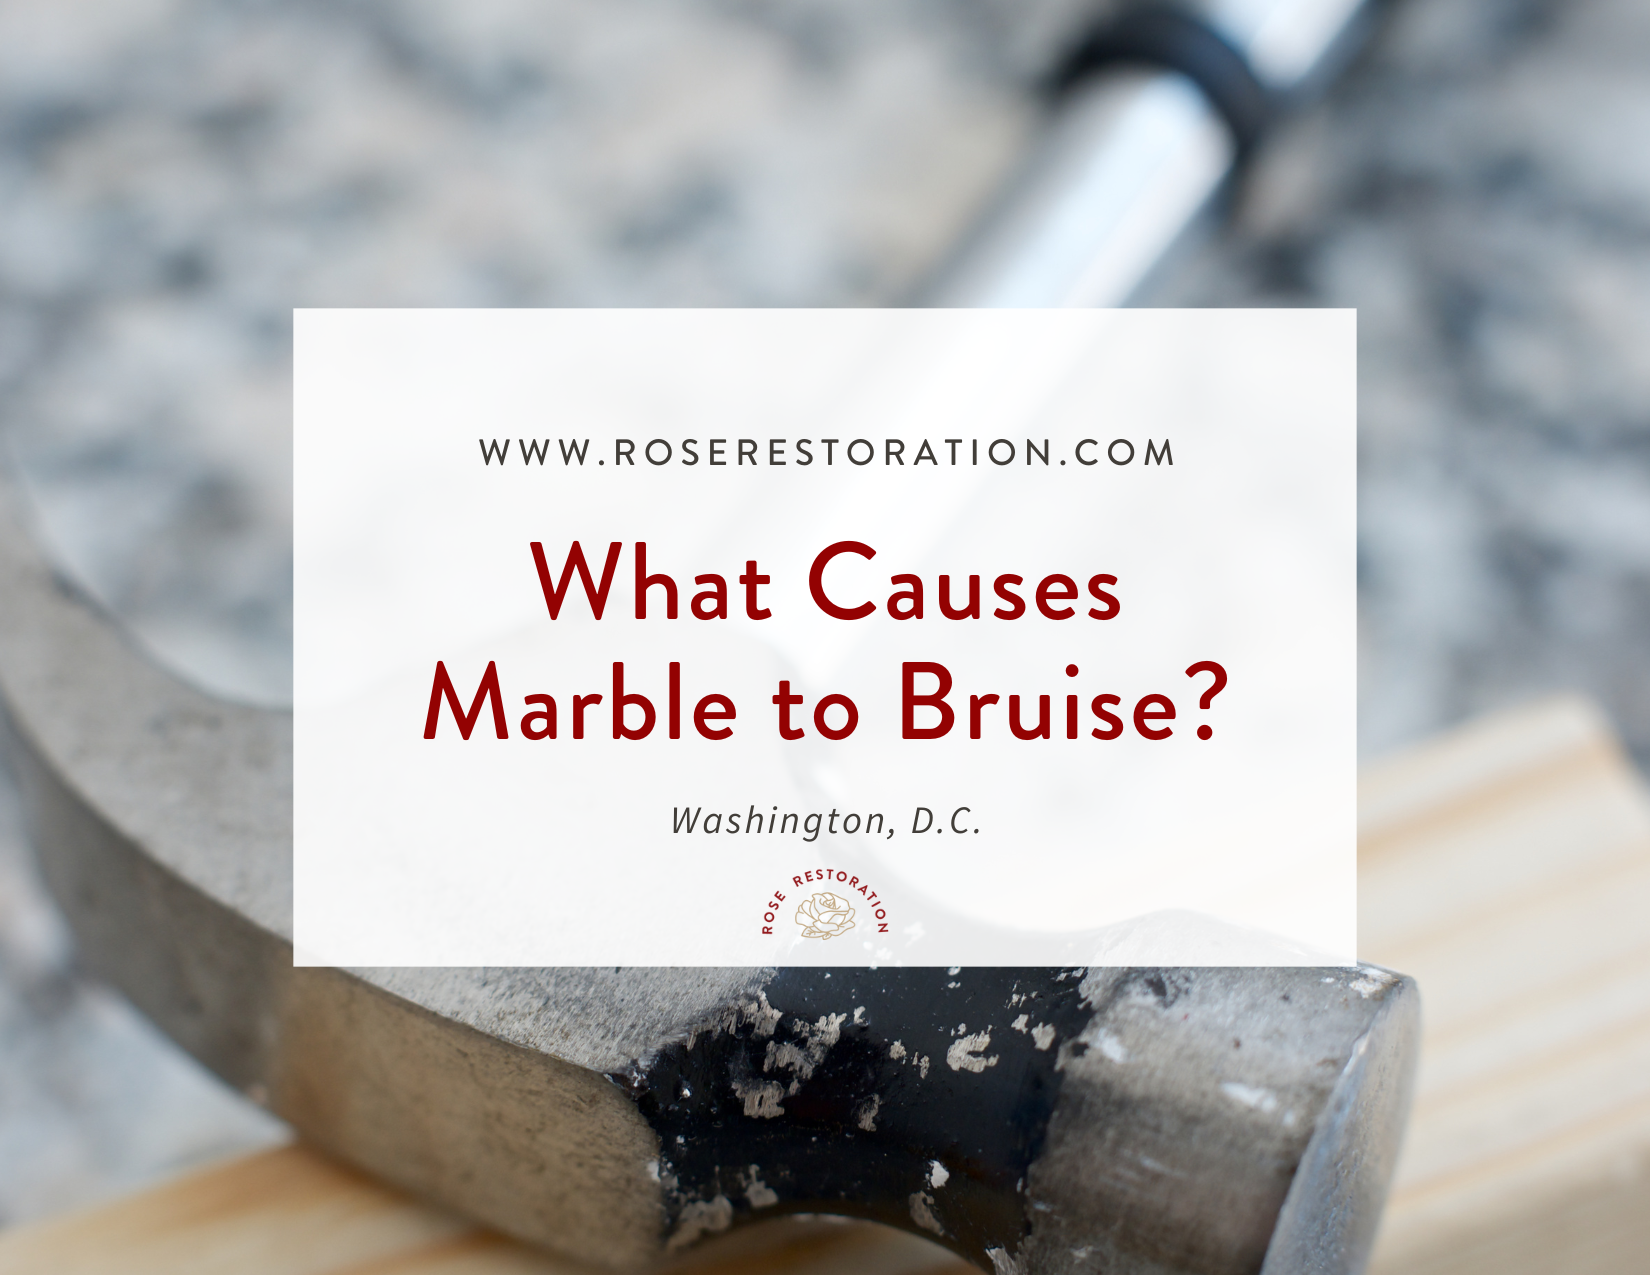 "What Causes Marble to Bruise?" Overtop a picture of a hammer.